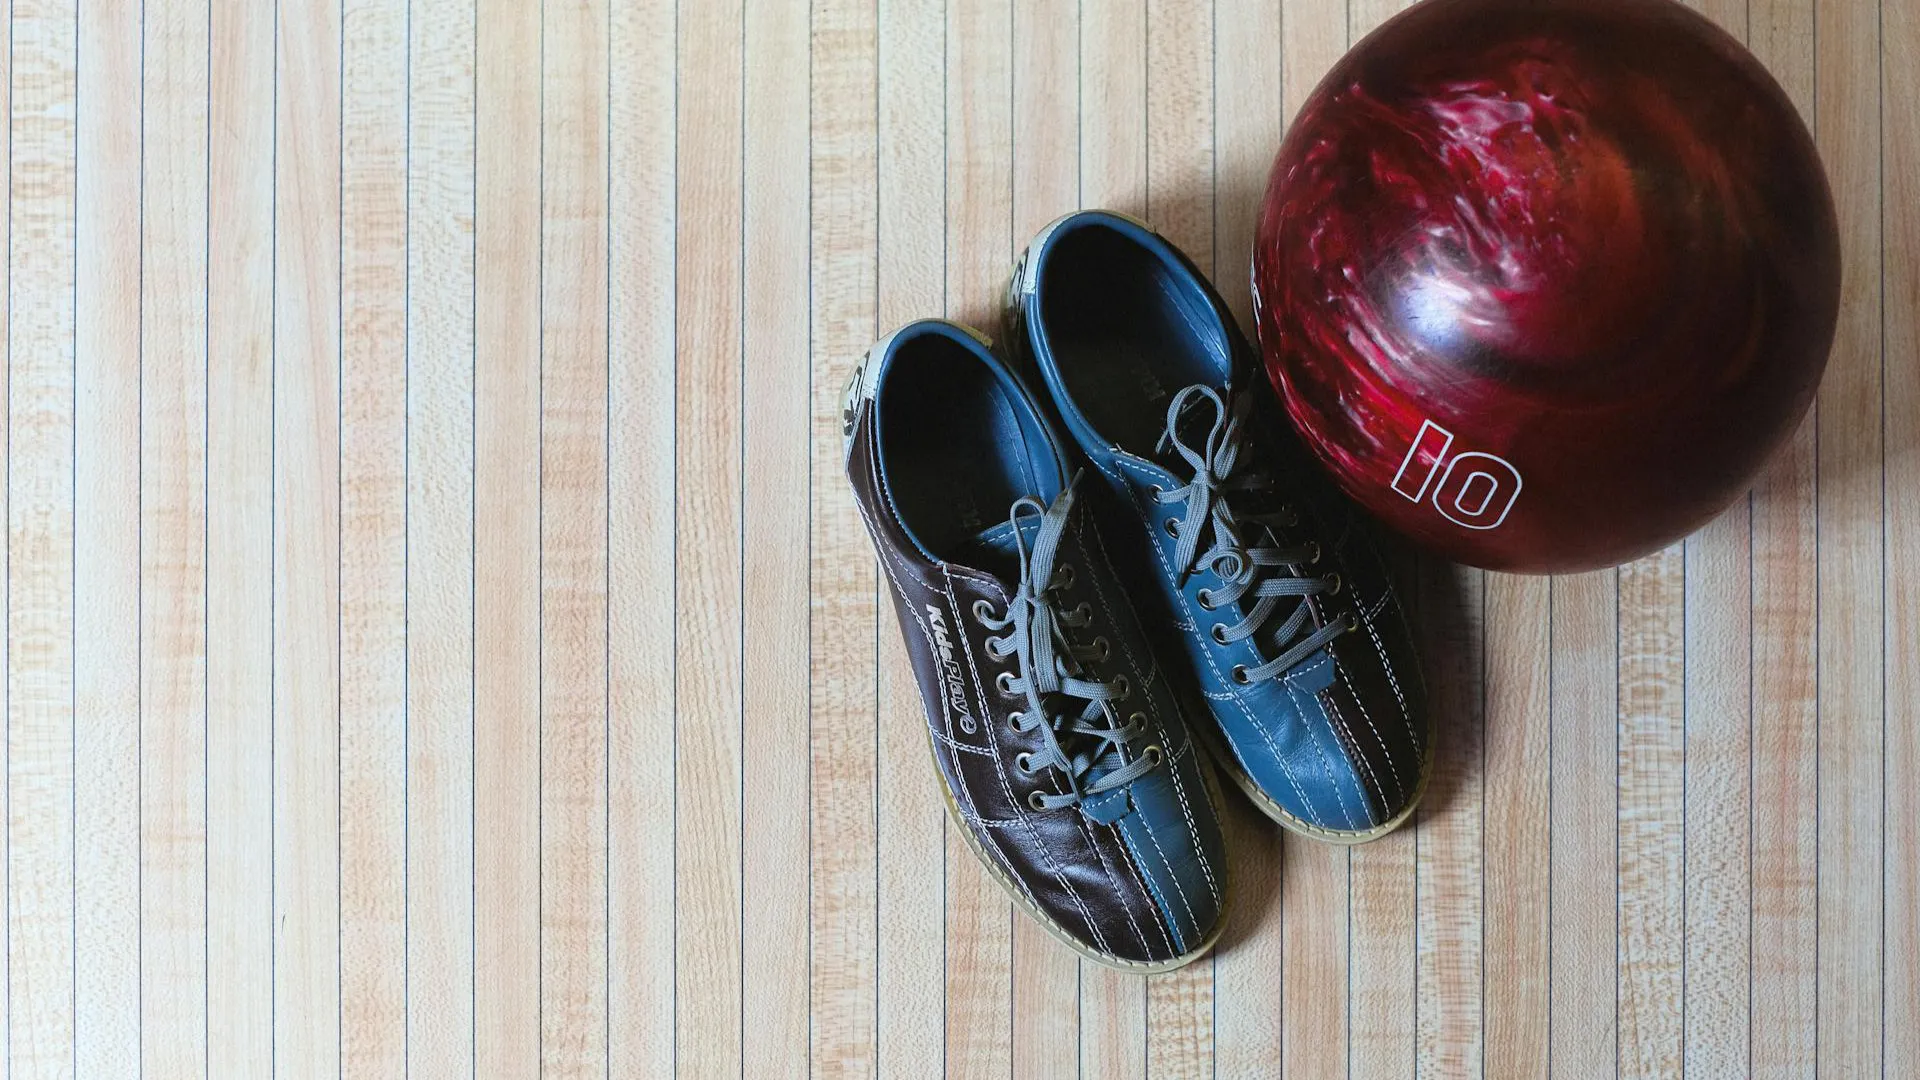 Image of bowling ball and shoes